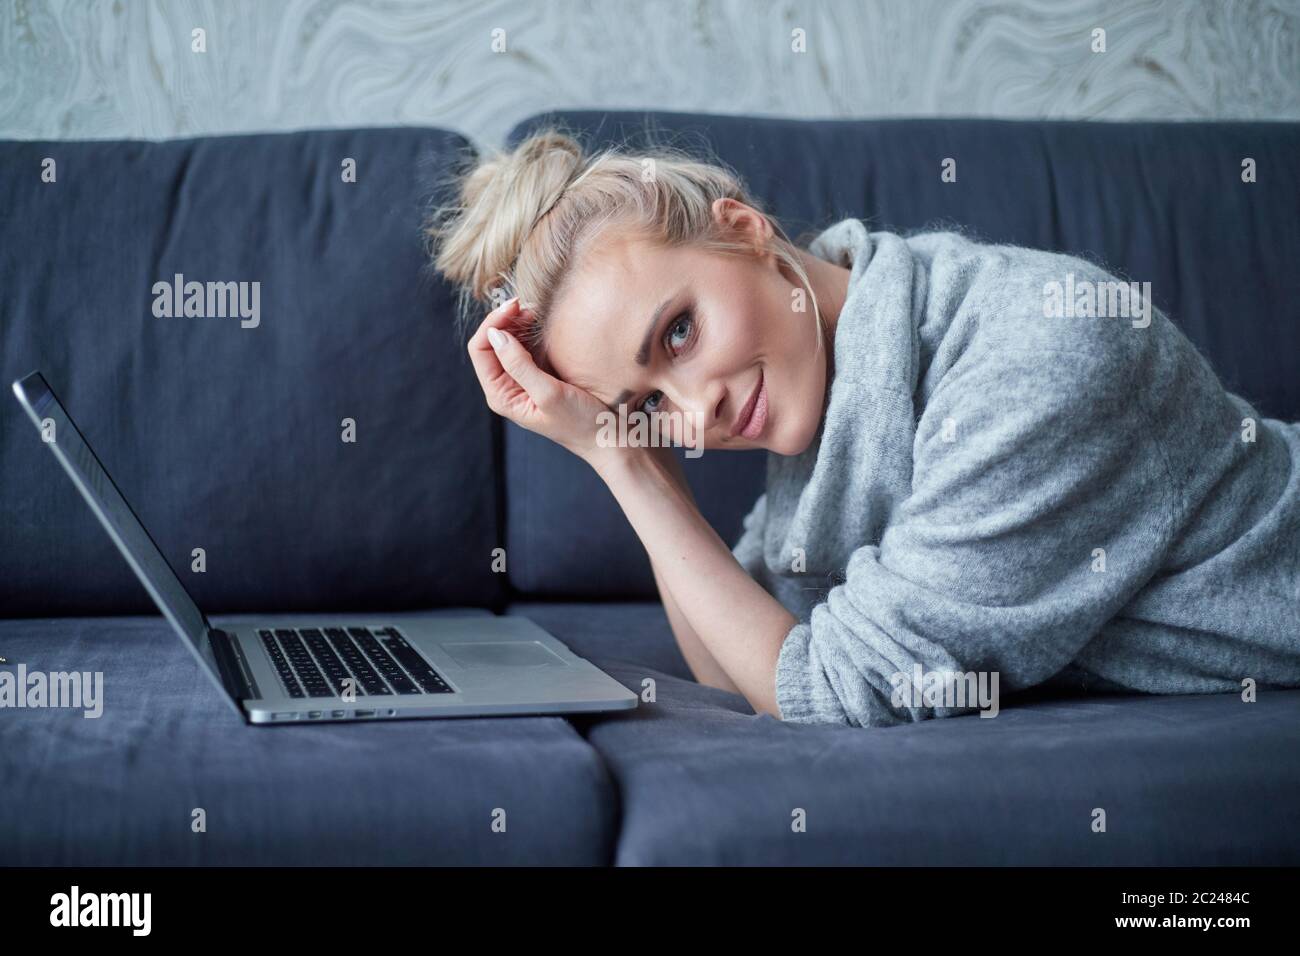 Happy blond woman lying prone on sofa and working on laptop computer Stock Photo